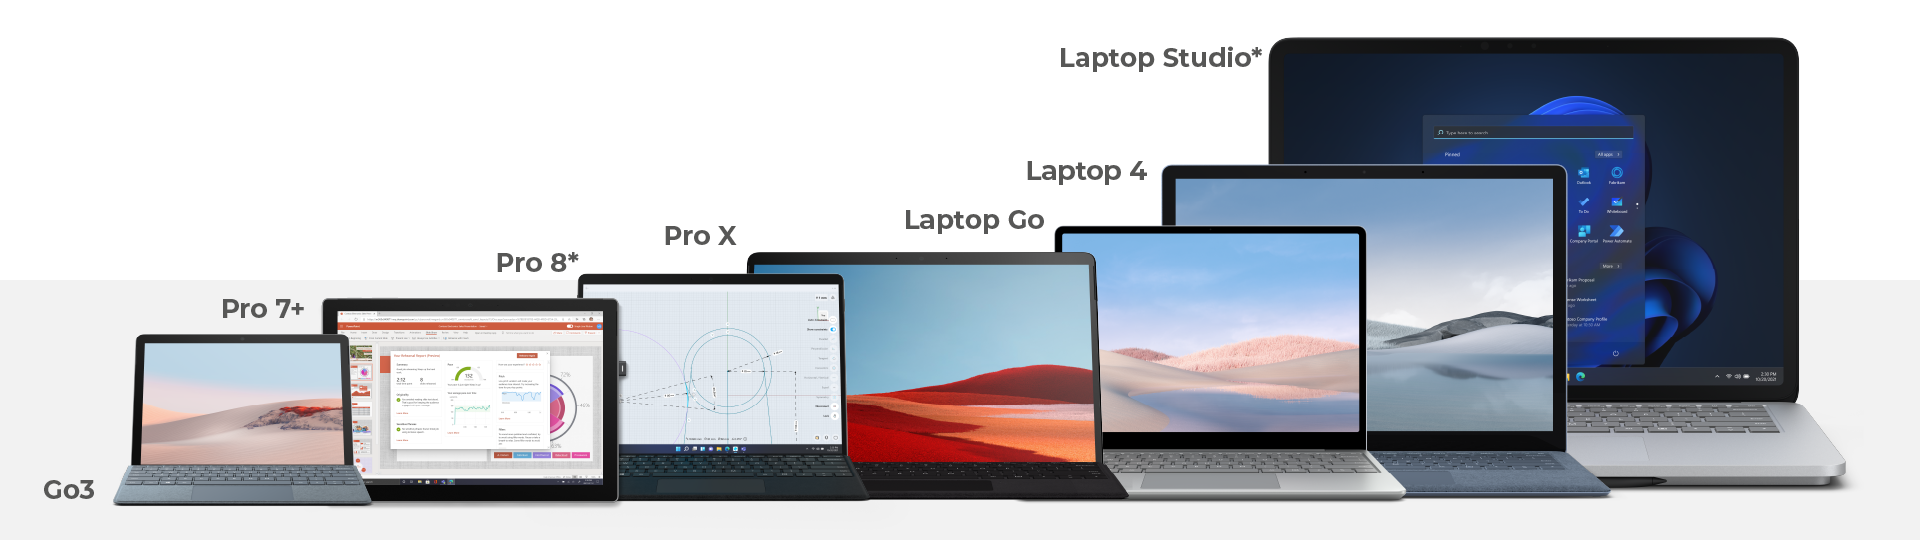 Surface-equipos